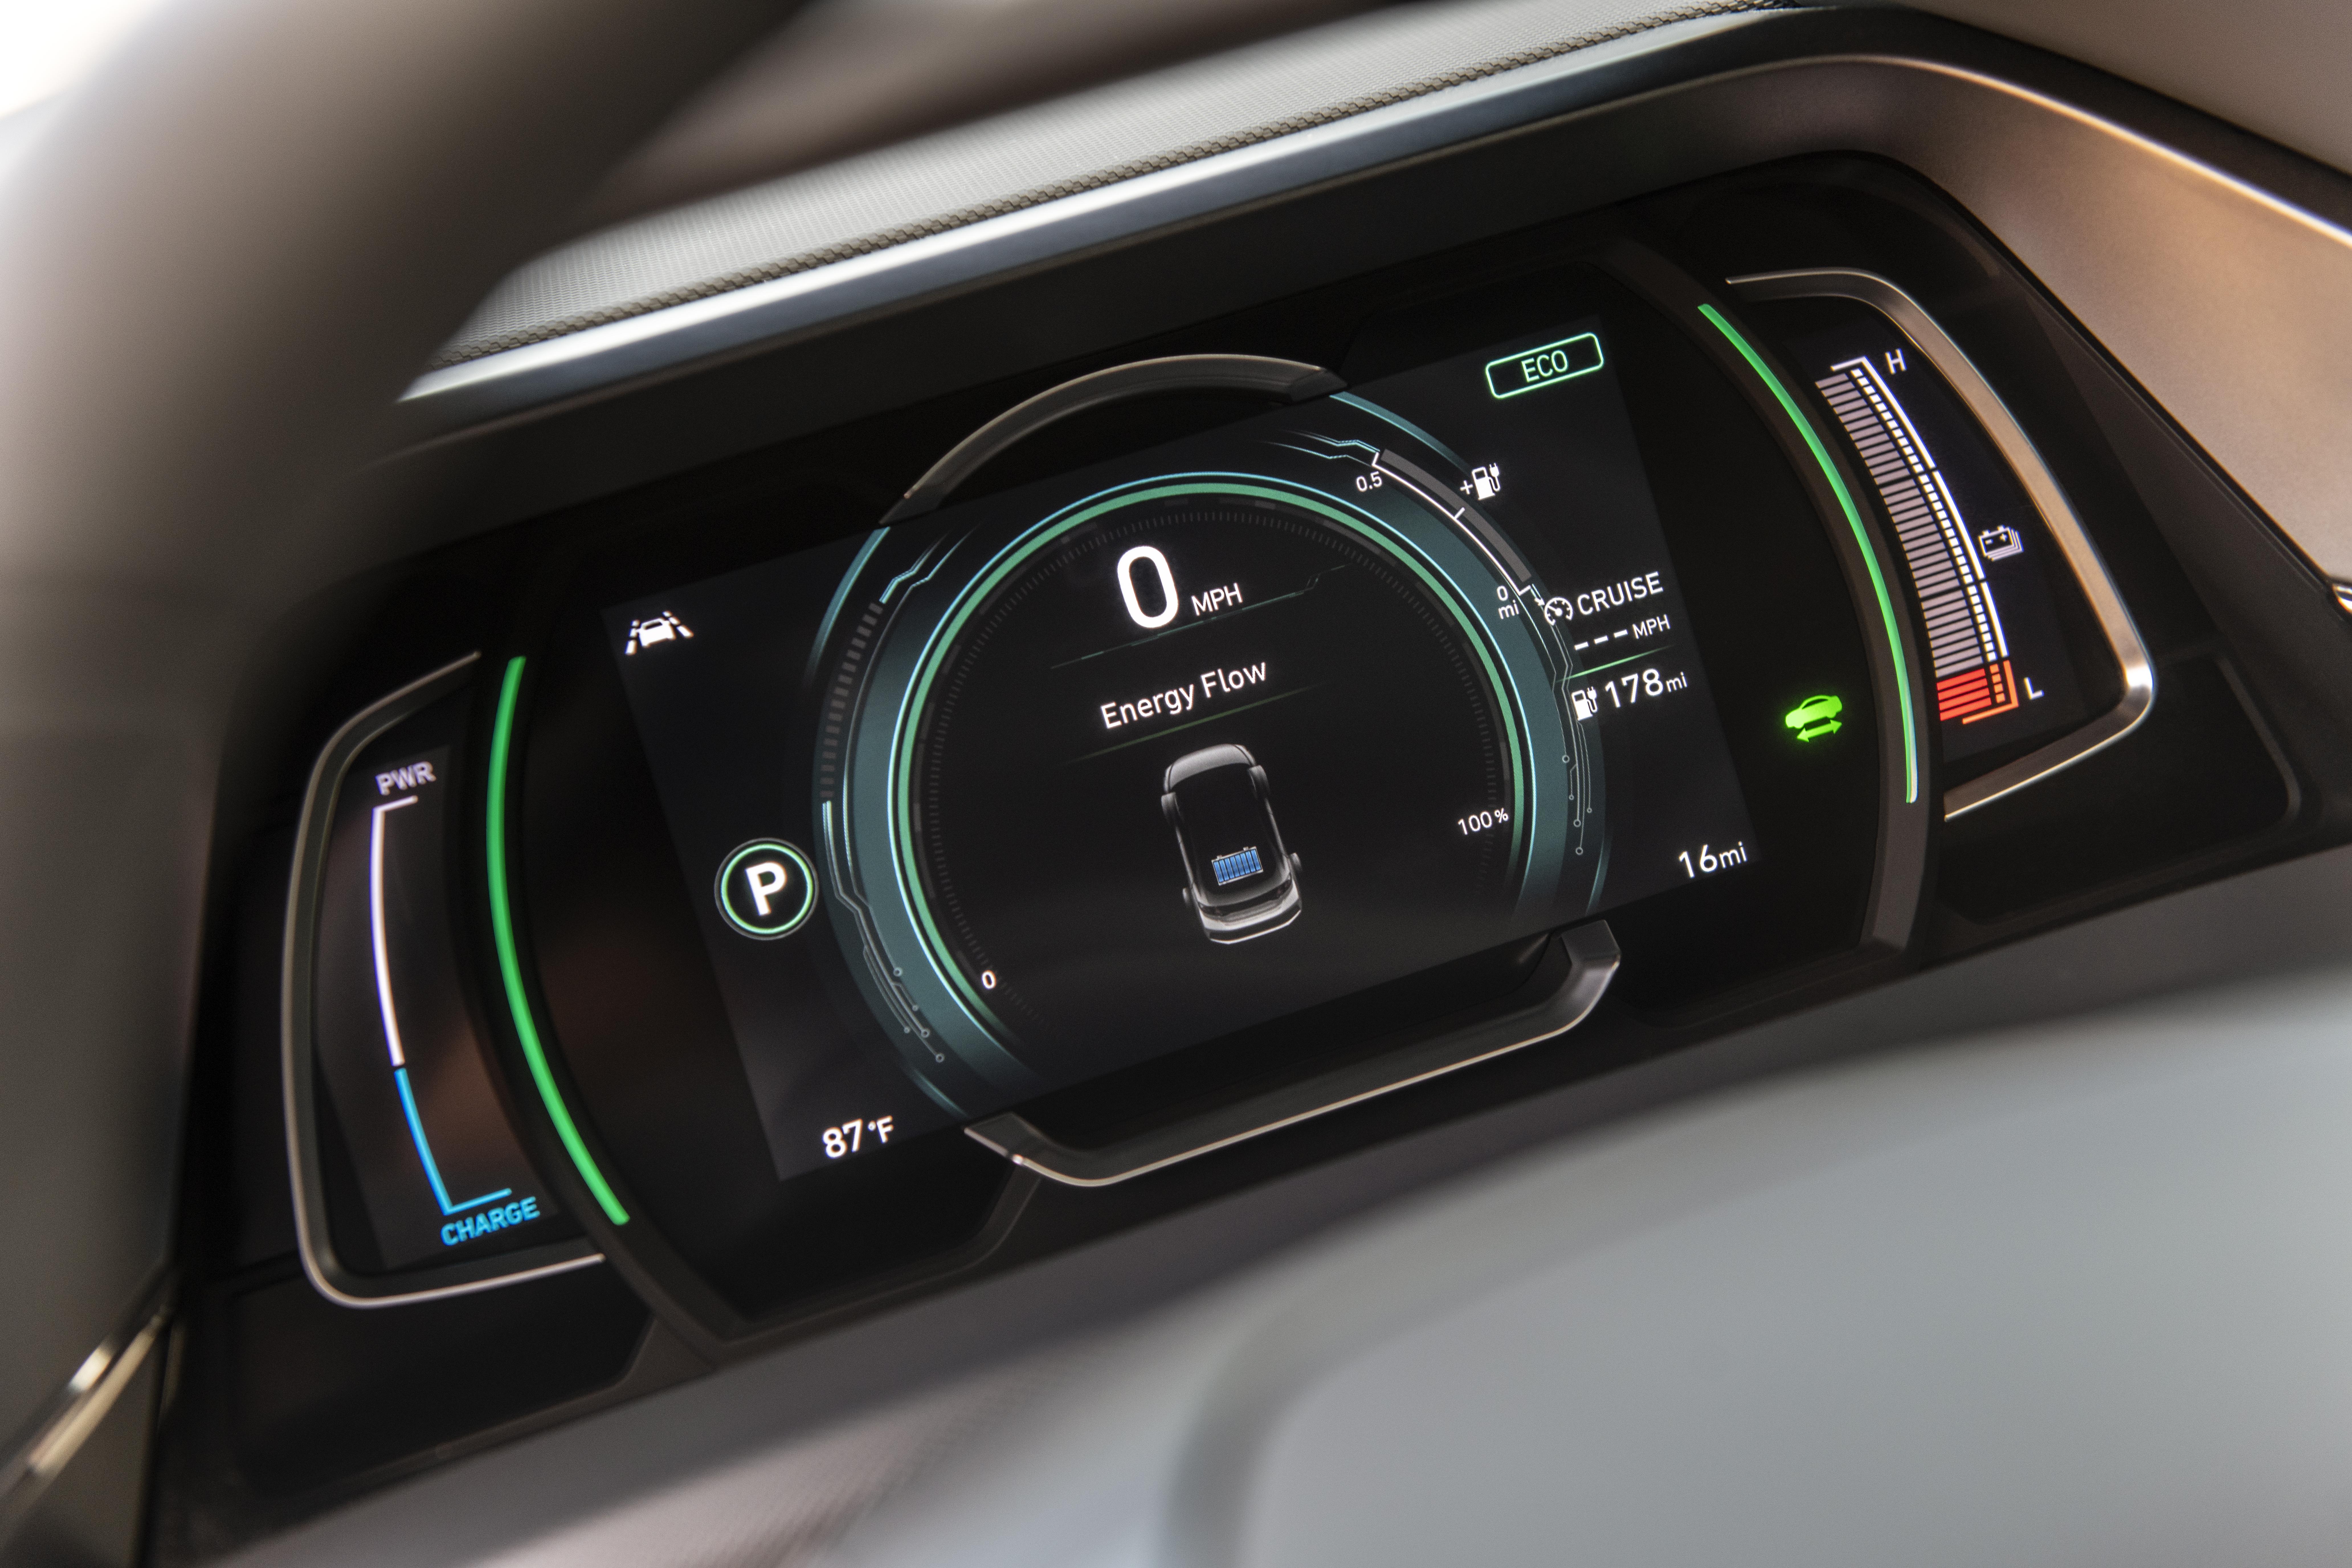 8 driving tips to get the most efficiency from your EV